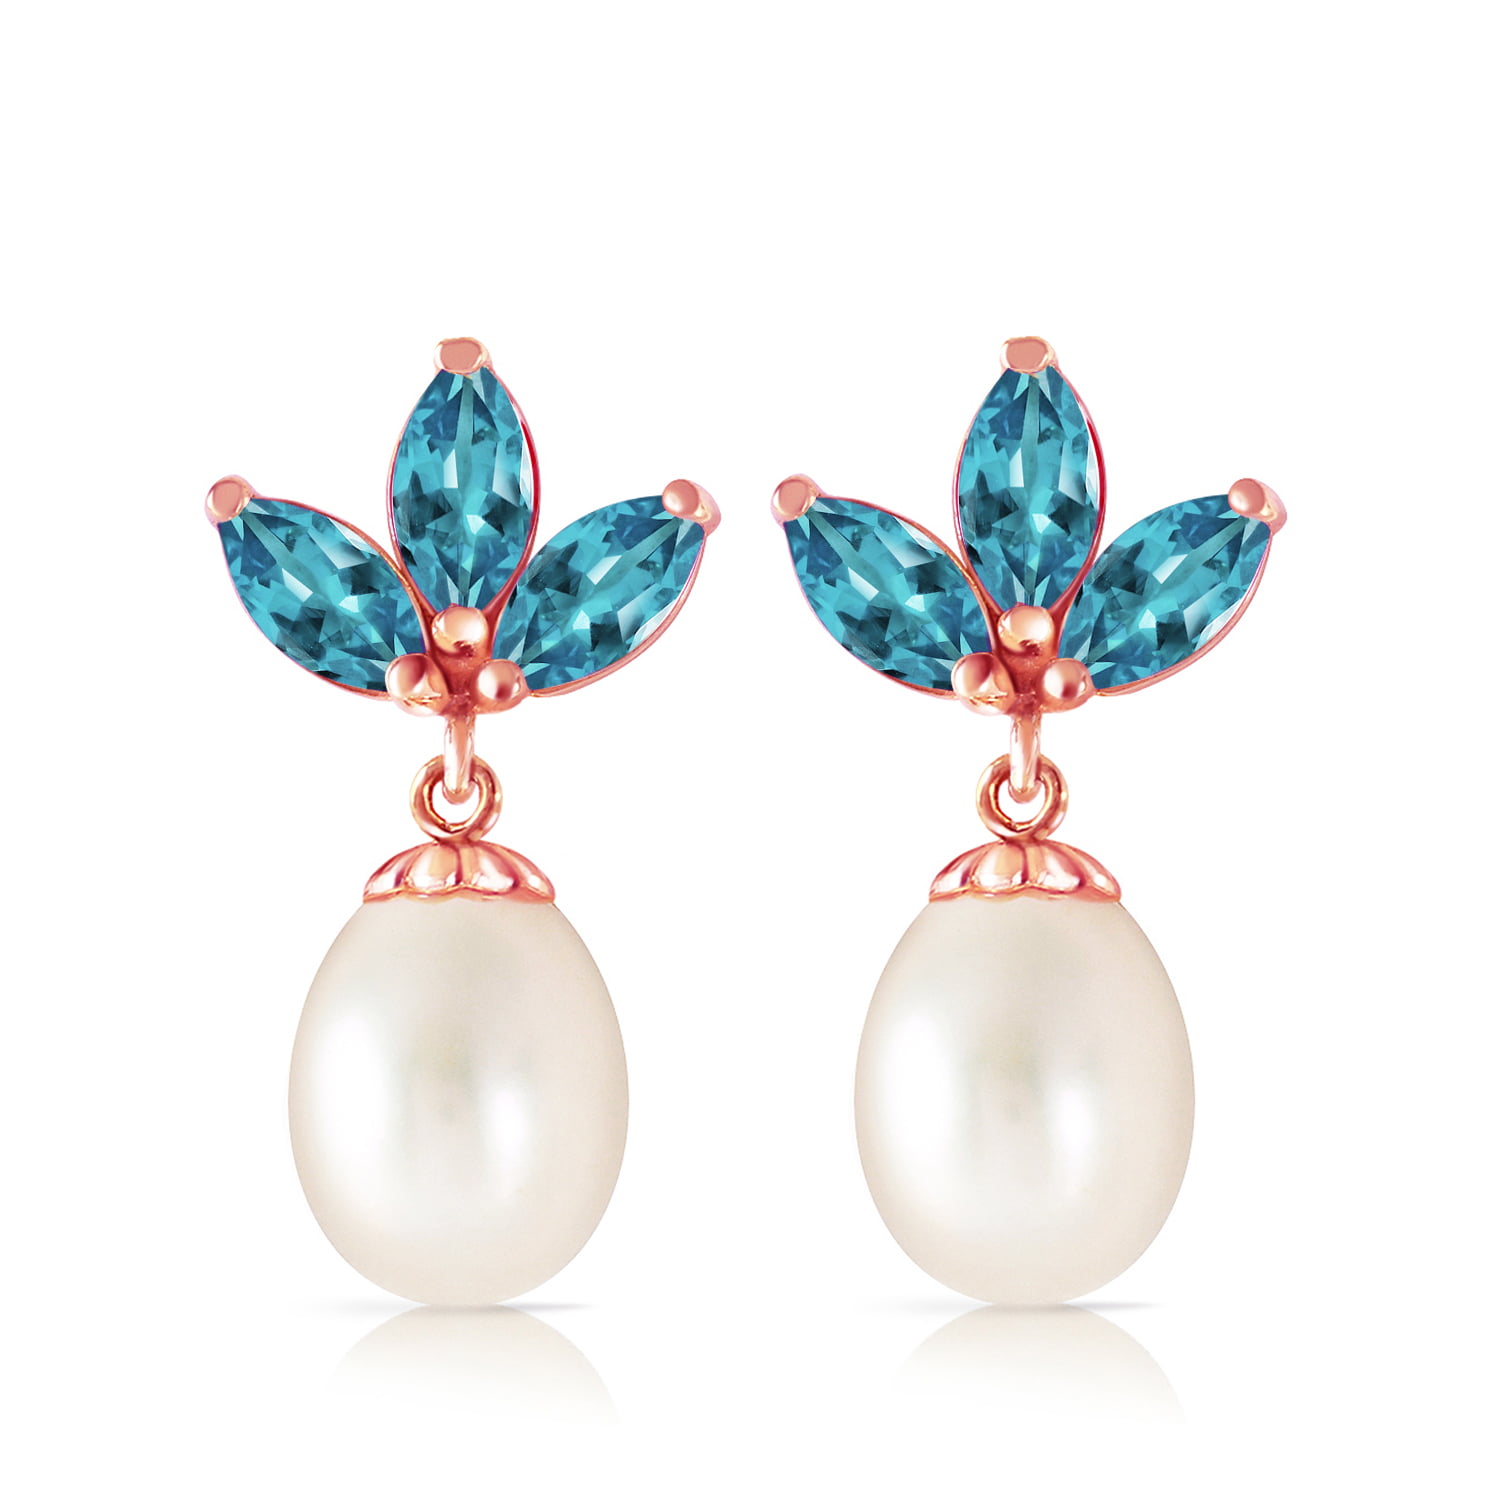 Galaxy Gold 14k Rose Gold Freshwater Pearl Earrings with Blue Topaz